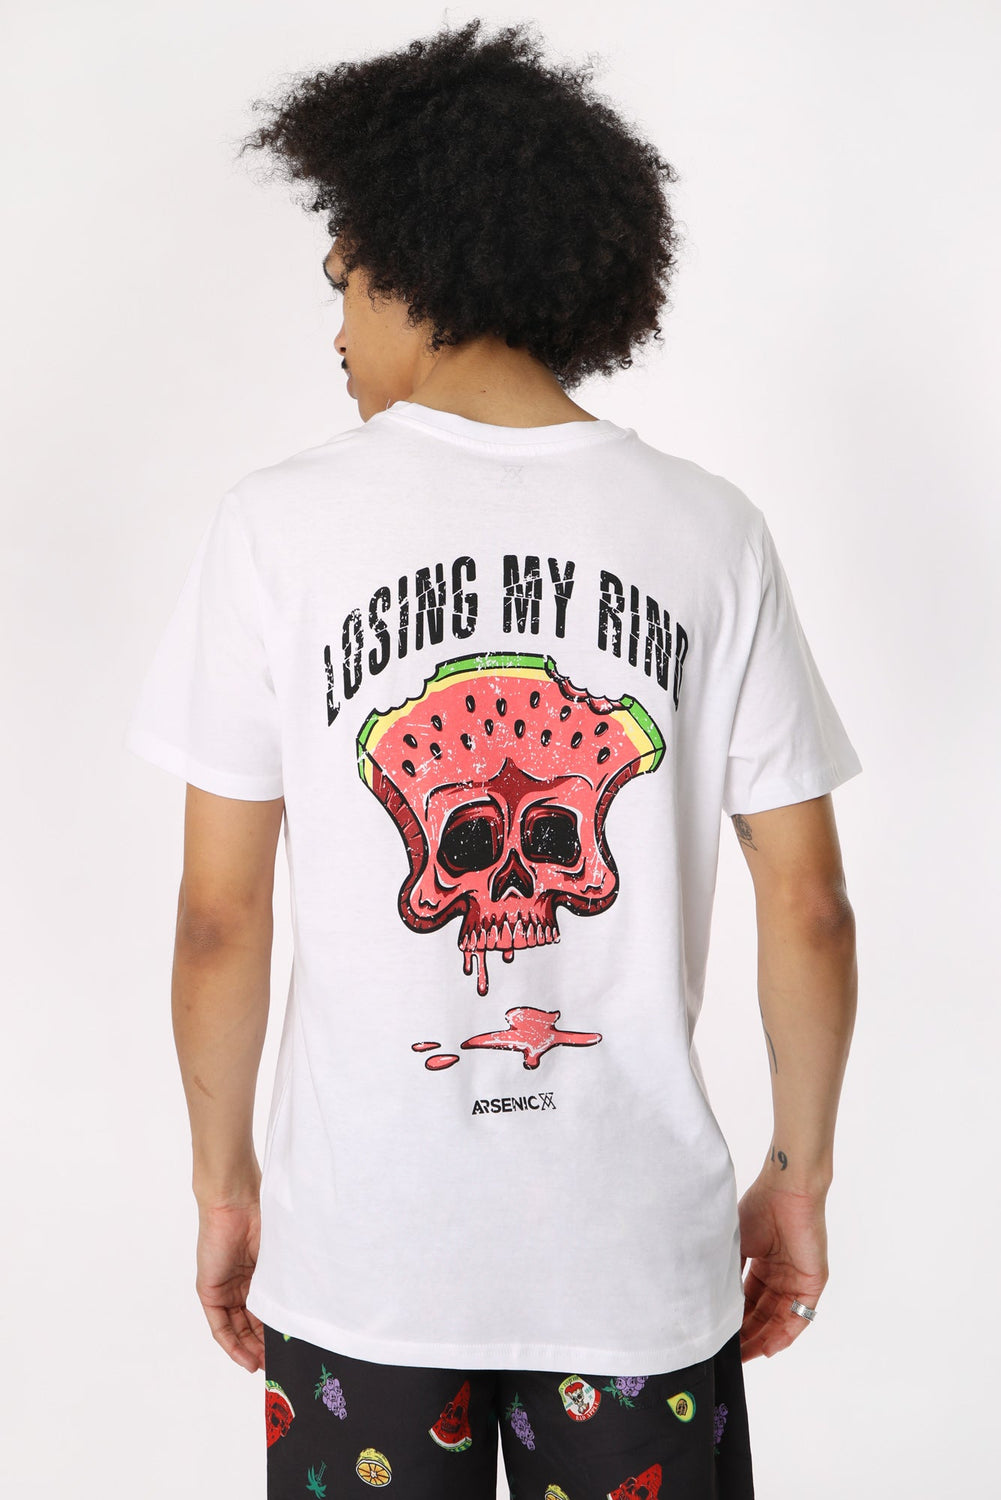 T-Shirt Losing My Rind Arsenic Homme T-Shirt Losing My Rind Arsenic Homme